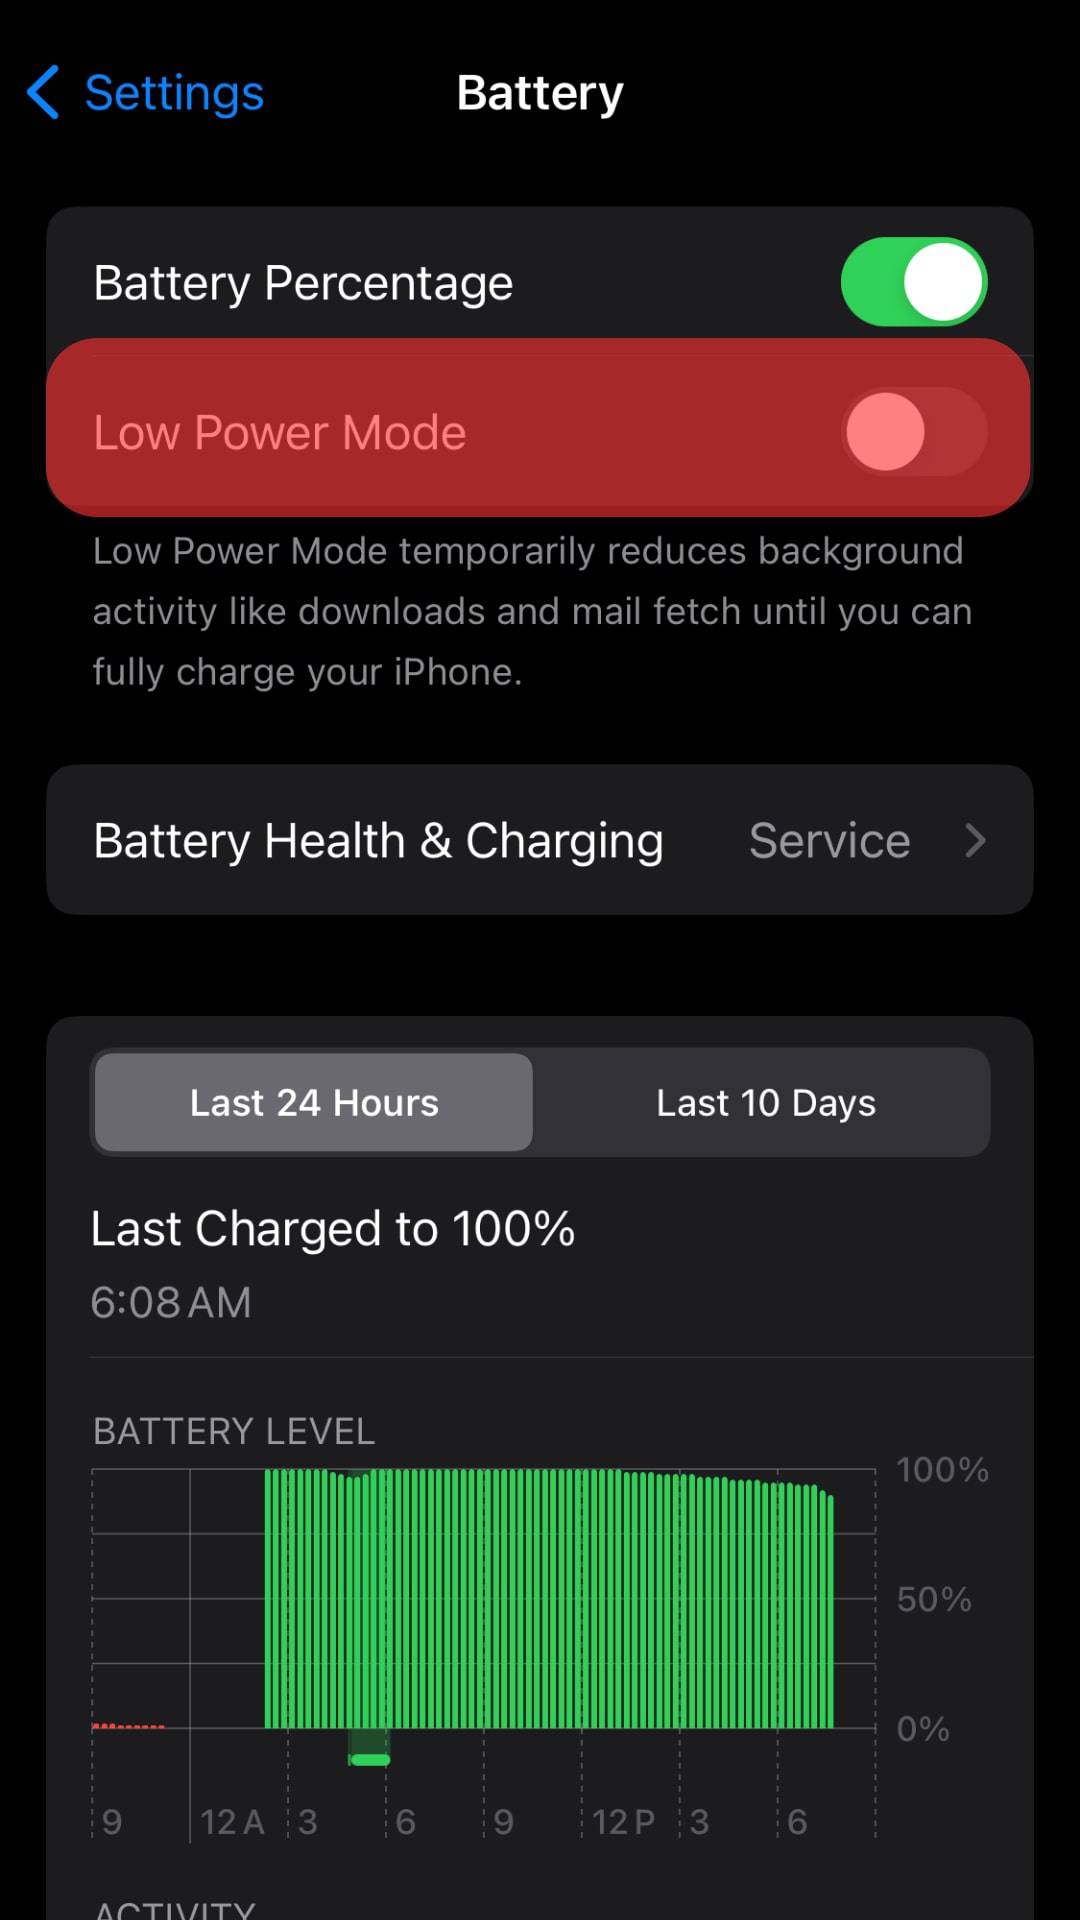 Disable The Low Power Mode Option. 